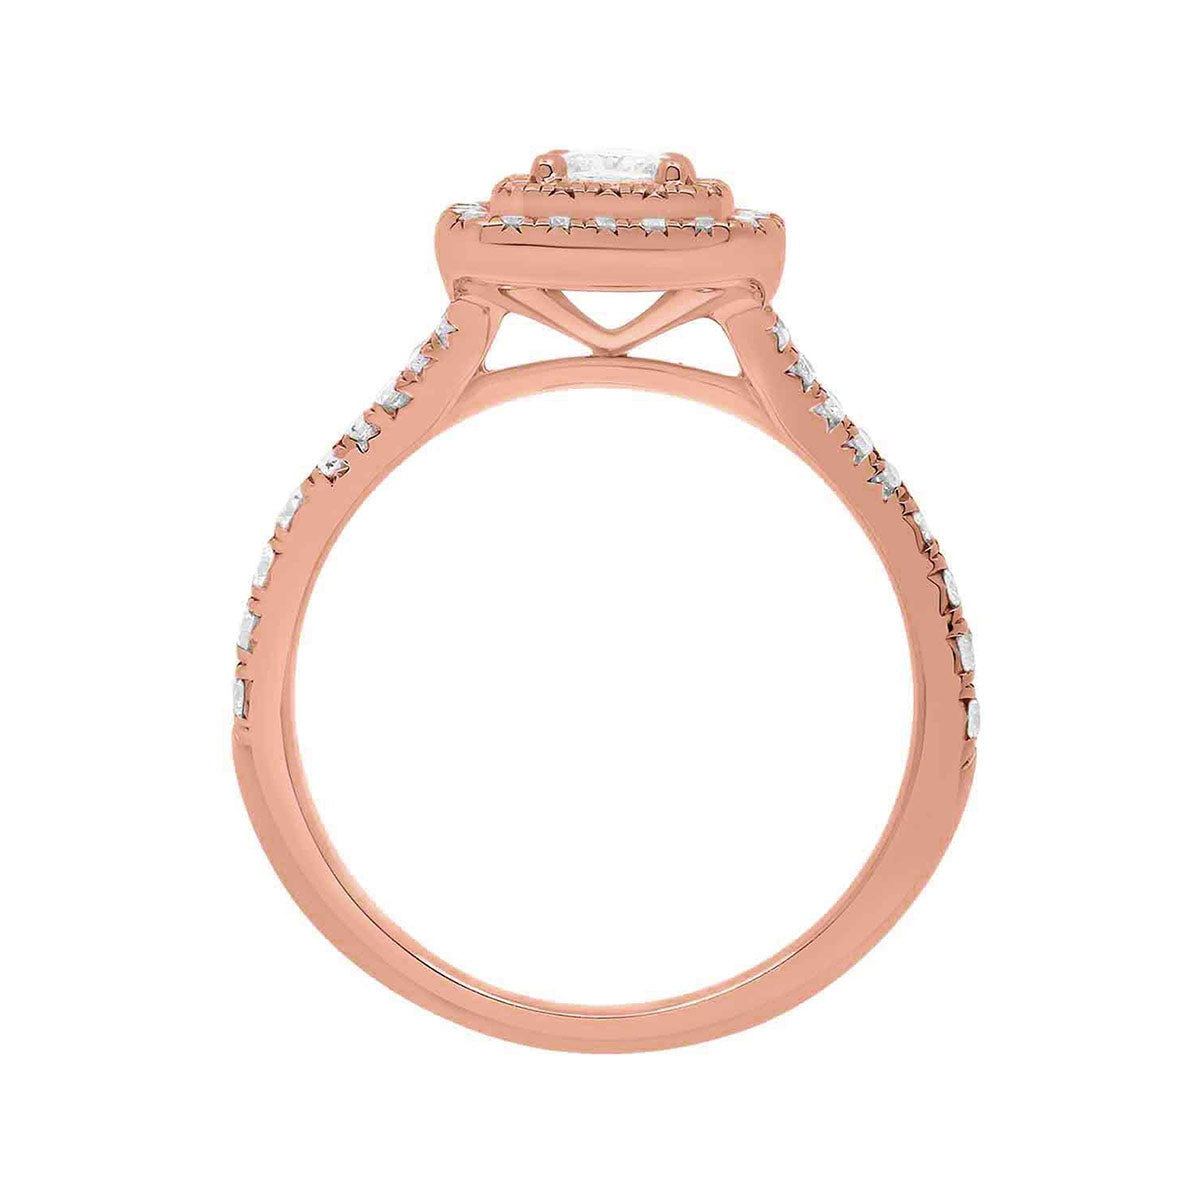 Double Halo Cushion Cut Diamond Ring in rose gold in an upstanding position